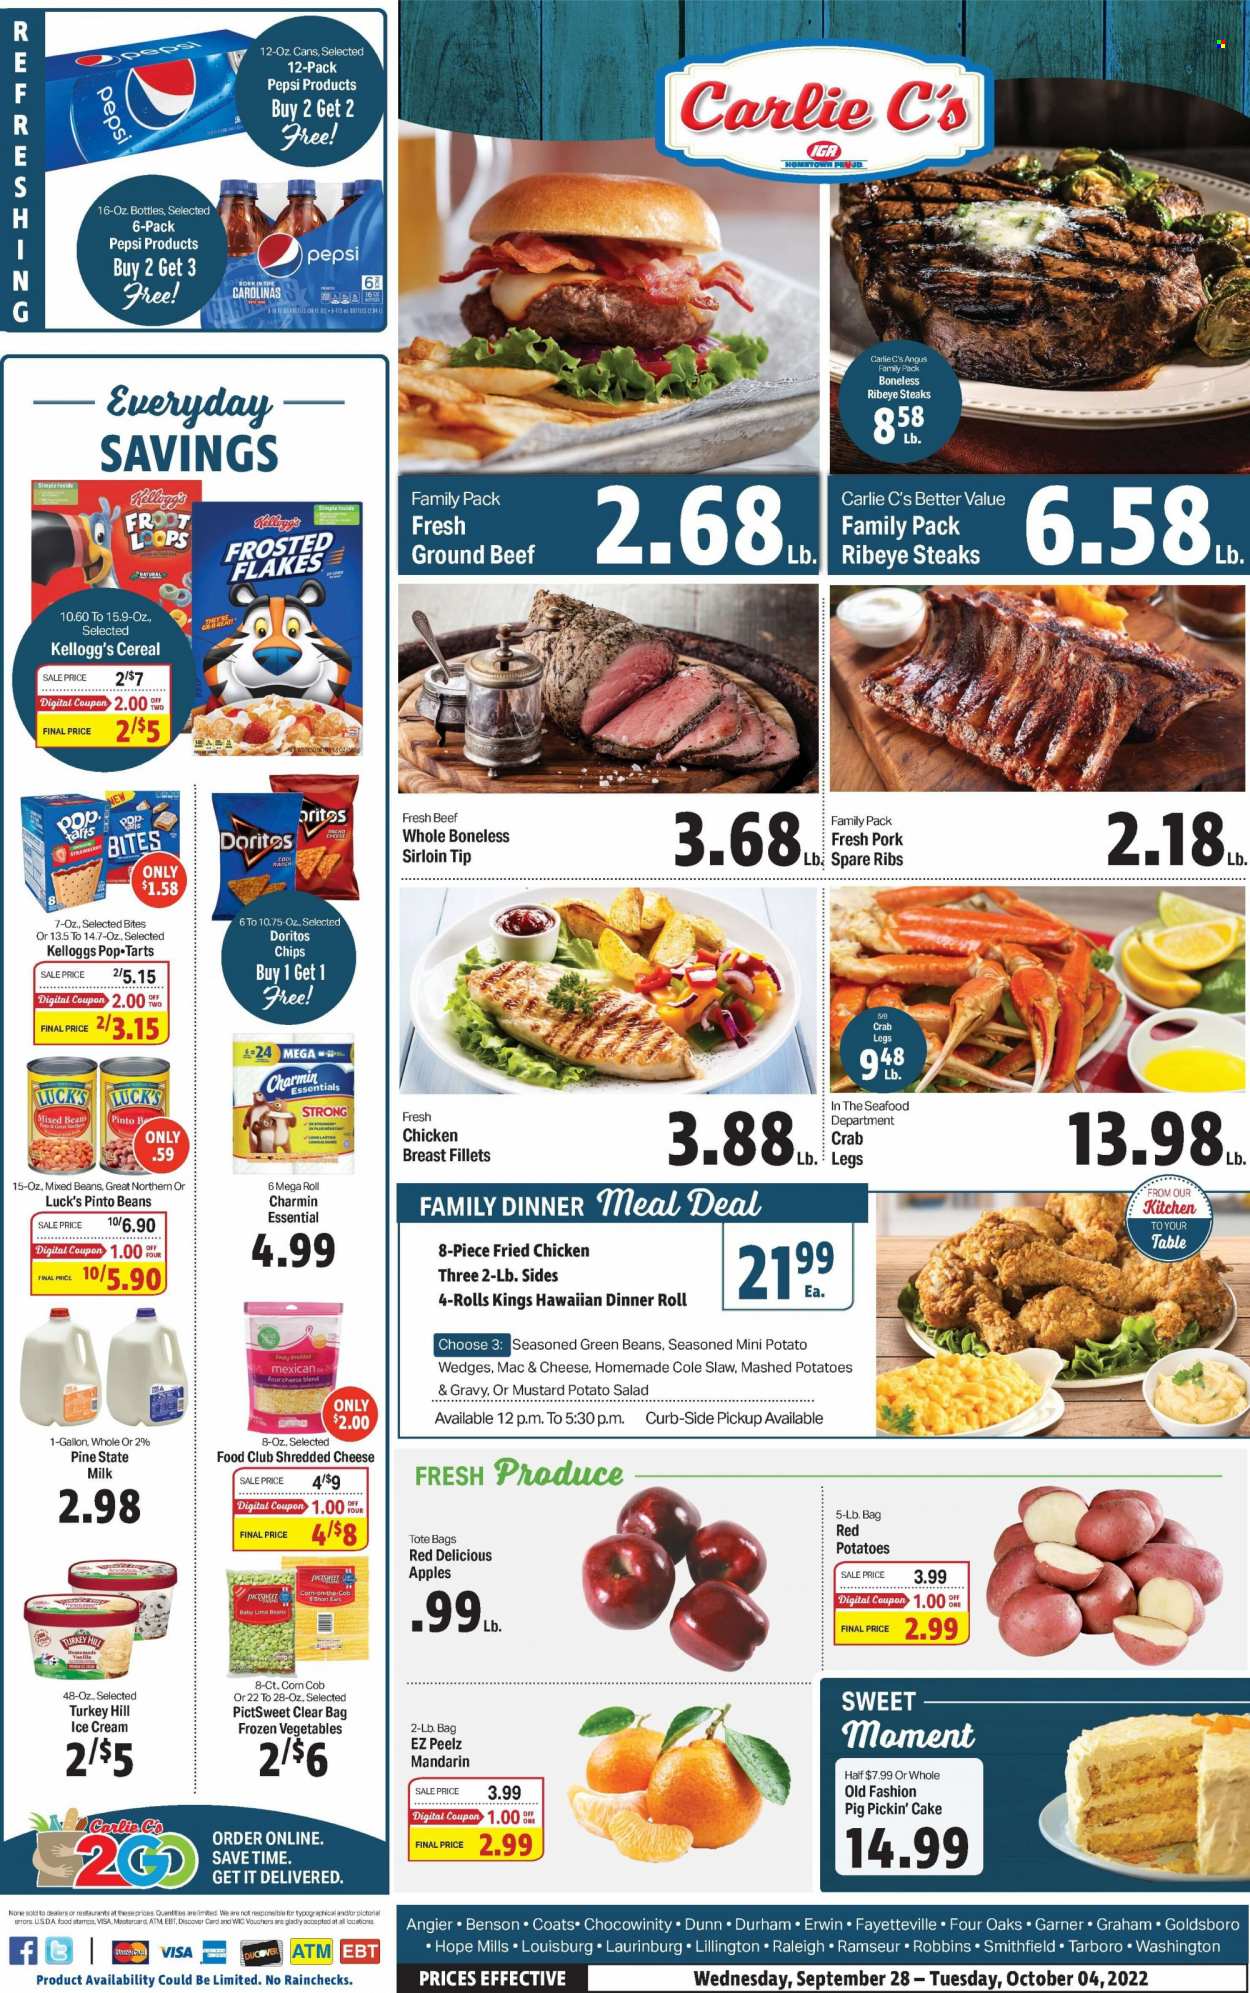 thumbnail - Carlie C's Flyer - 09/28/2022 - 10/04/2022 - Sales products - cake, dinner rolls, corn, green beans, salad, red potatoes, apples, mandarines, Red Delicious apples, seafood, crab legs, crab, mashed potatoes, fried chicken, potato salad, shredded cheese, milk, ice cream, frozen vegetables, lima beans, potato wedges, Kellogg's, Pop-Tarts, Doritos, pinto beans, cereals, Frosted Flakes, mustard, Pepsi, chicken breasts, beef meat, ground beef, steak, ribeye steak, pork spare ribs. Page 1.